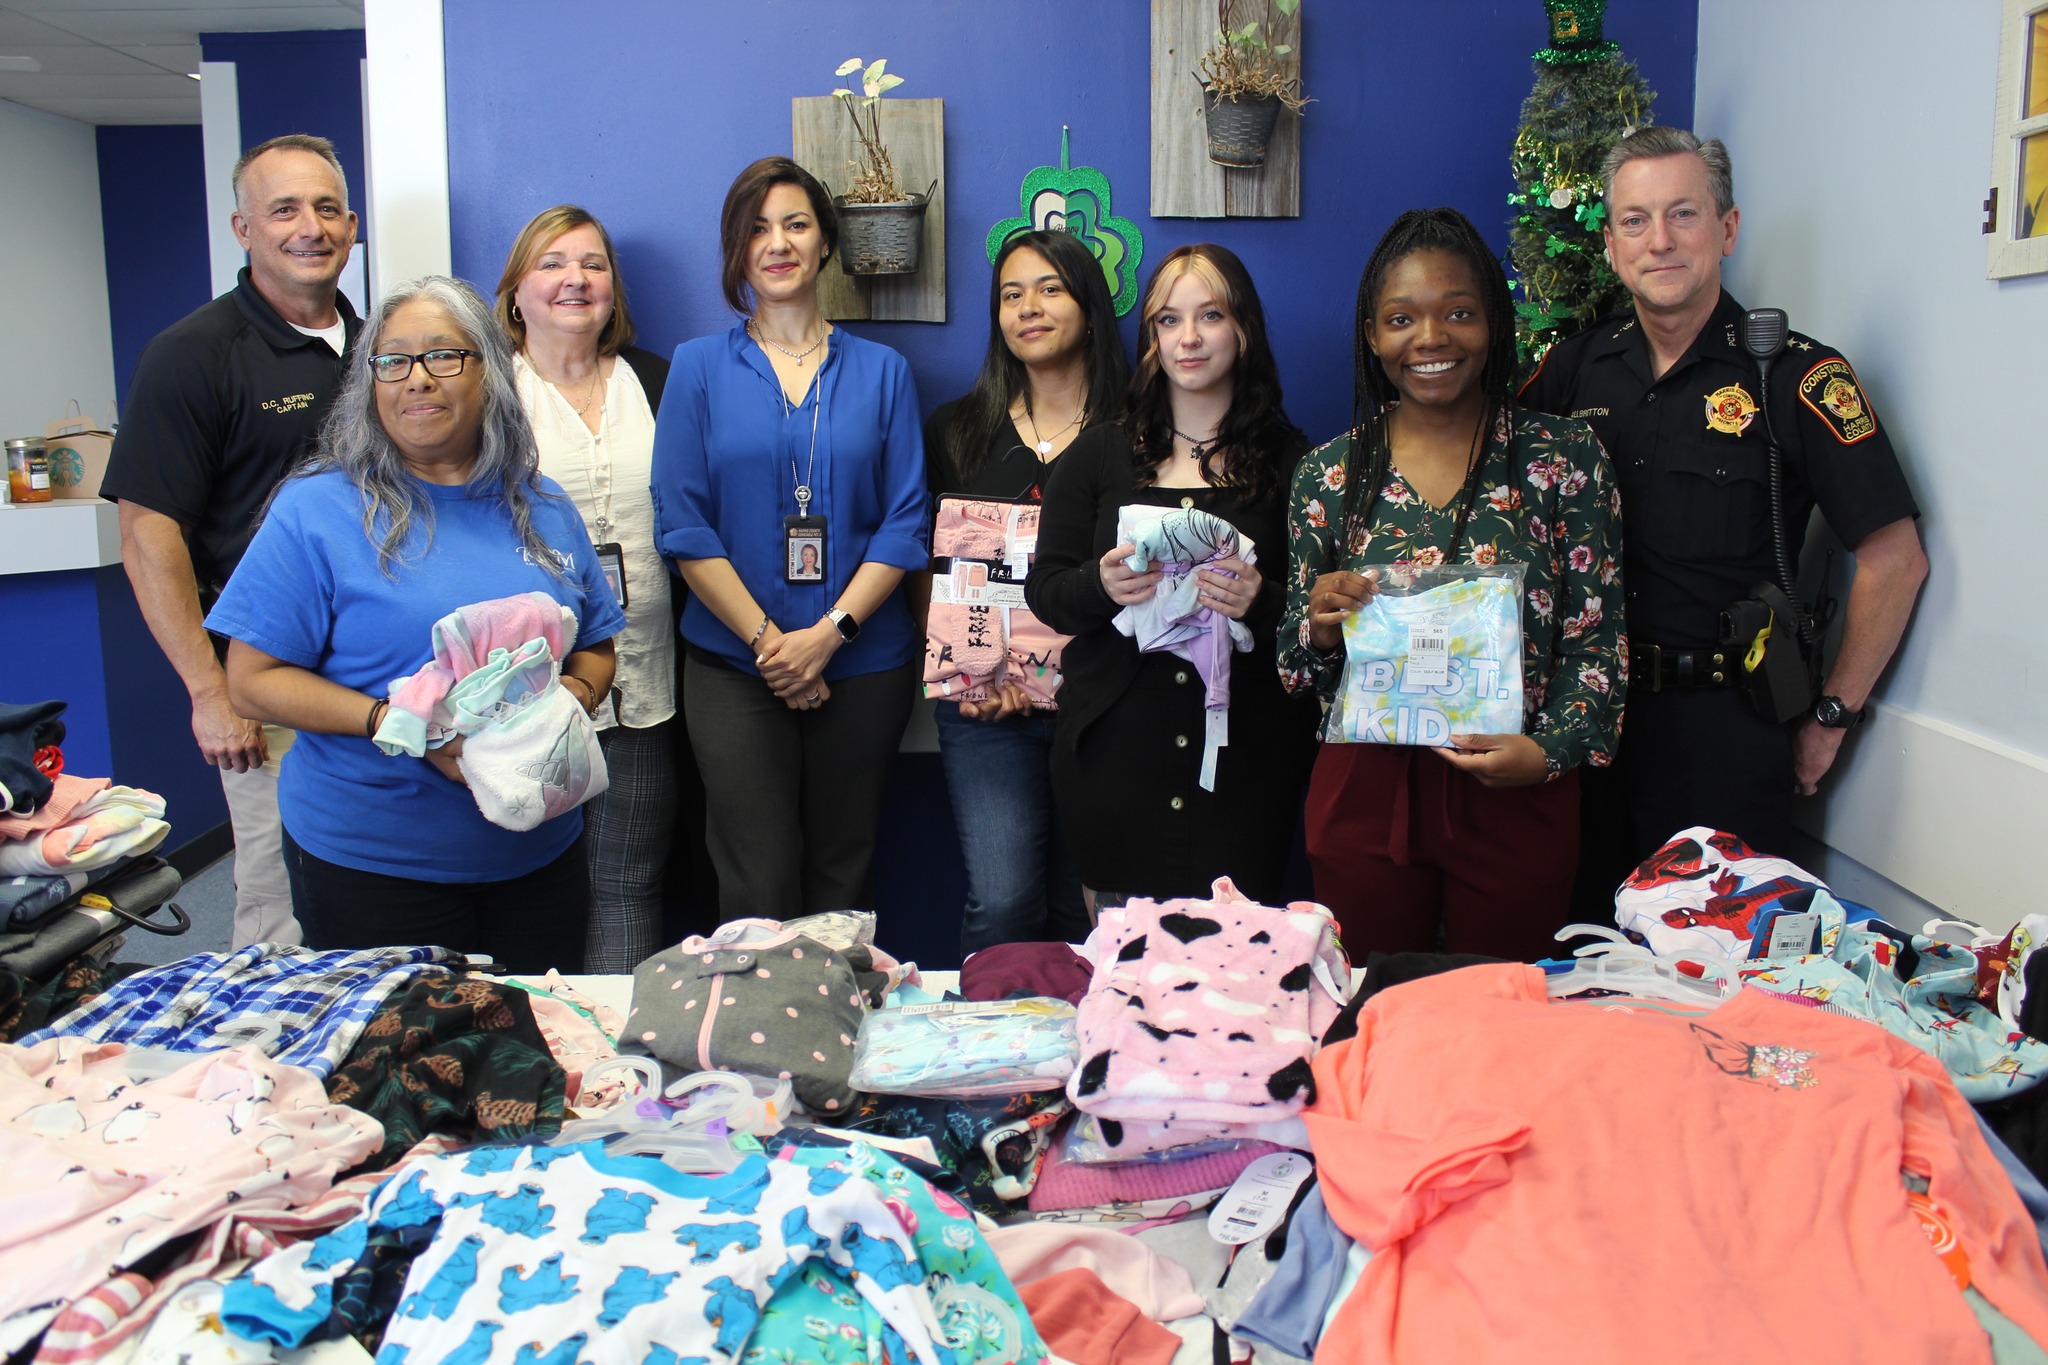 PJ's for a Good Cause: Constable Ted Heap's Victims Assistance Unit Delivers PJ's to Women and Children in Need